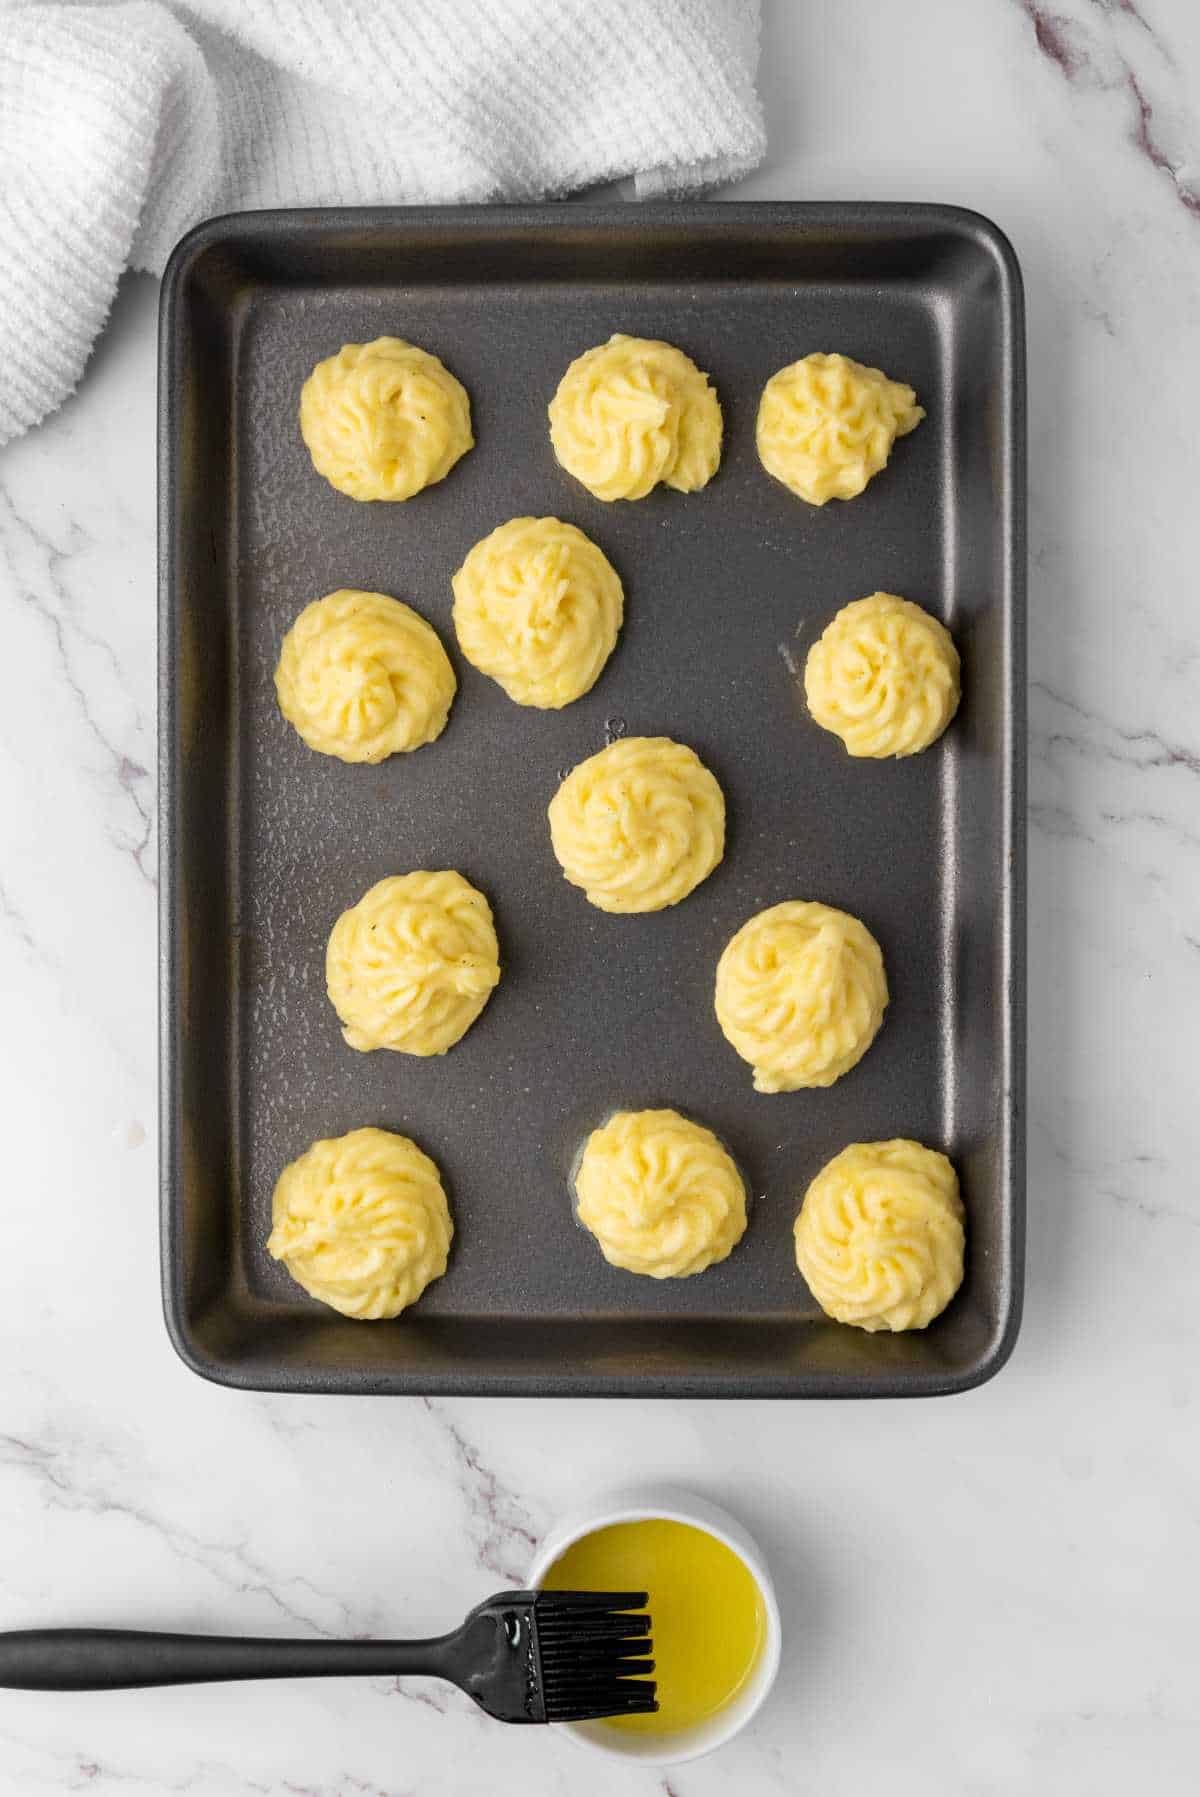 potato puffs on a tray for baking.